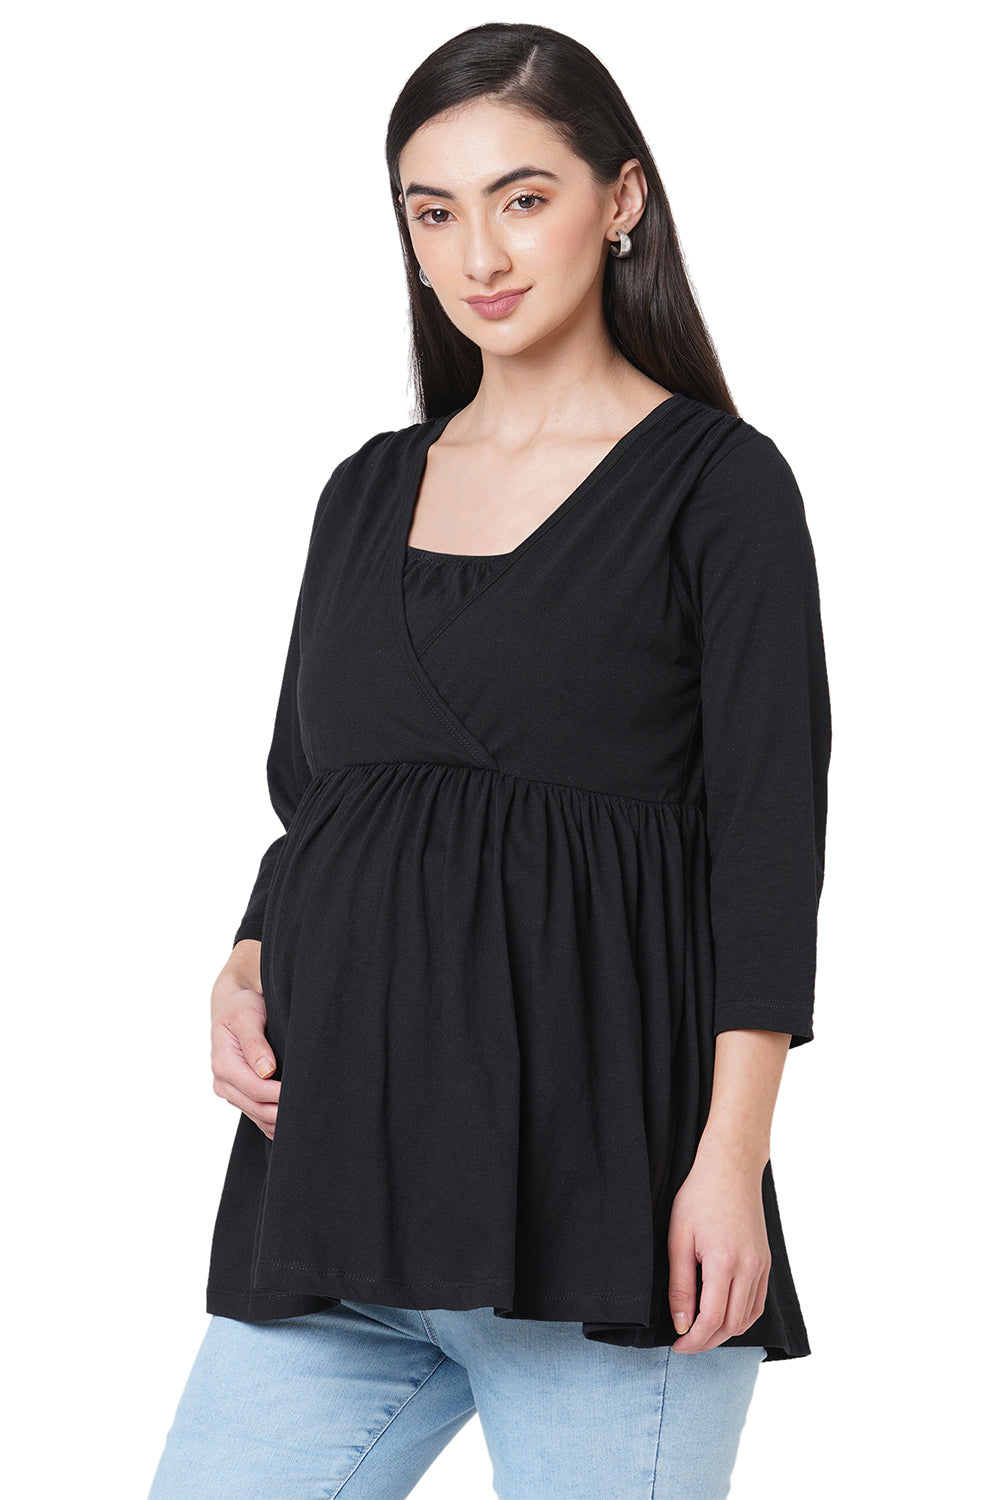 Organic Healthy Full Sleeves Maternity Top_ISML006-Anthracite